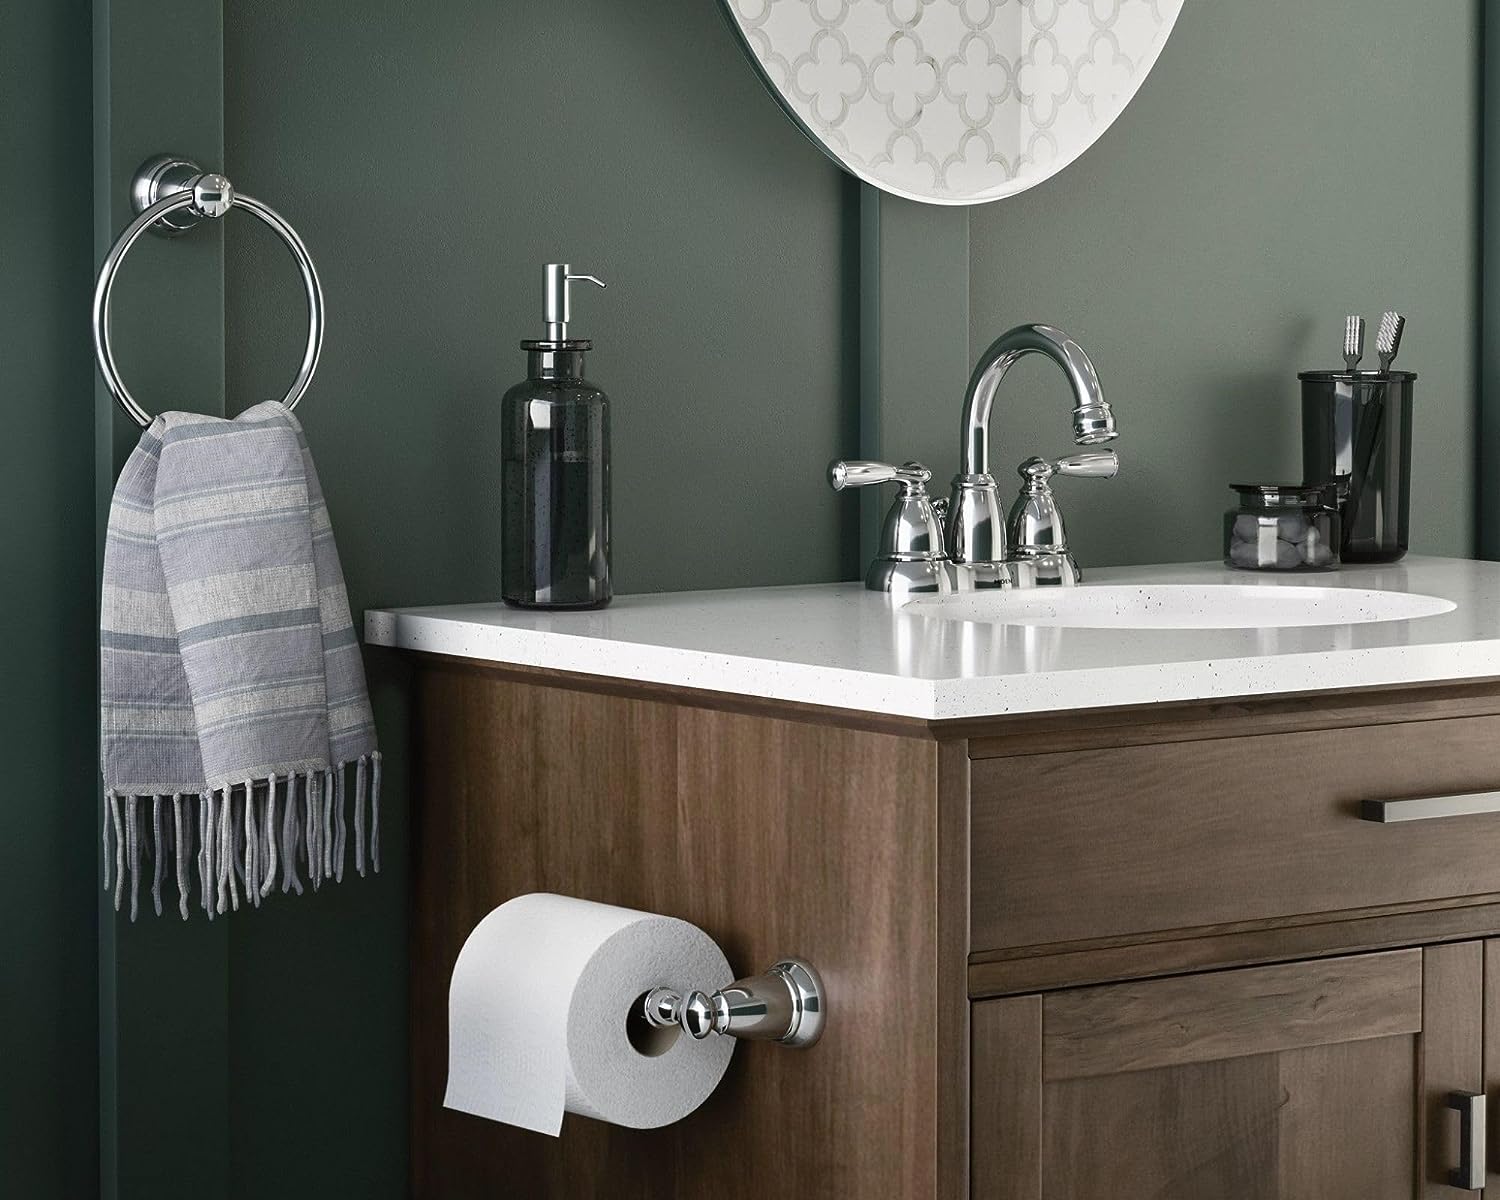 How To Remove Moen Towel Ring With Locking Tab On Base